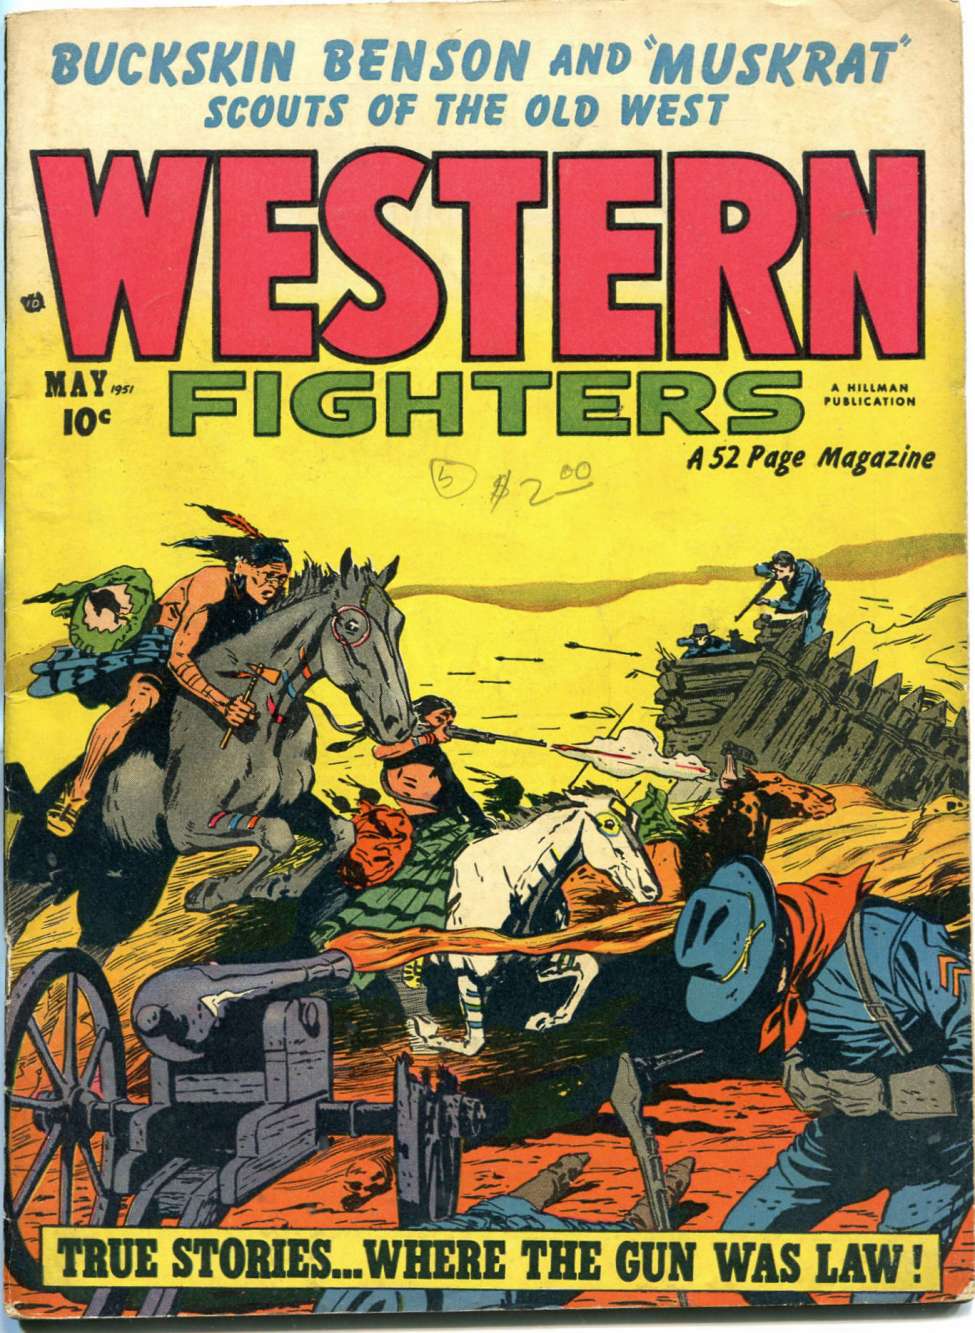 Book Cover For Western Fighters v3 6